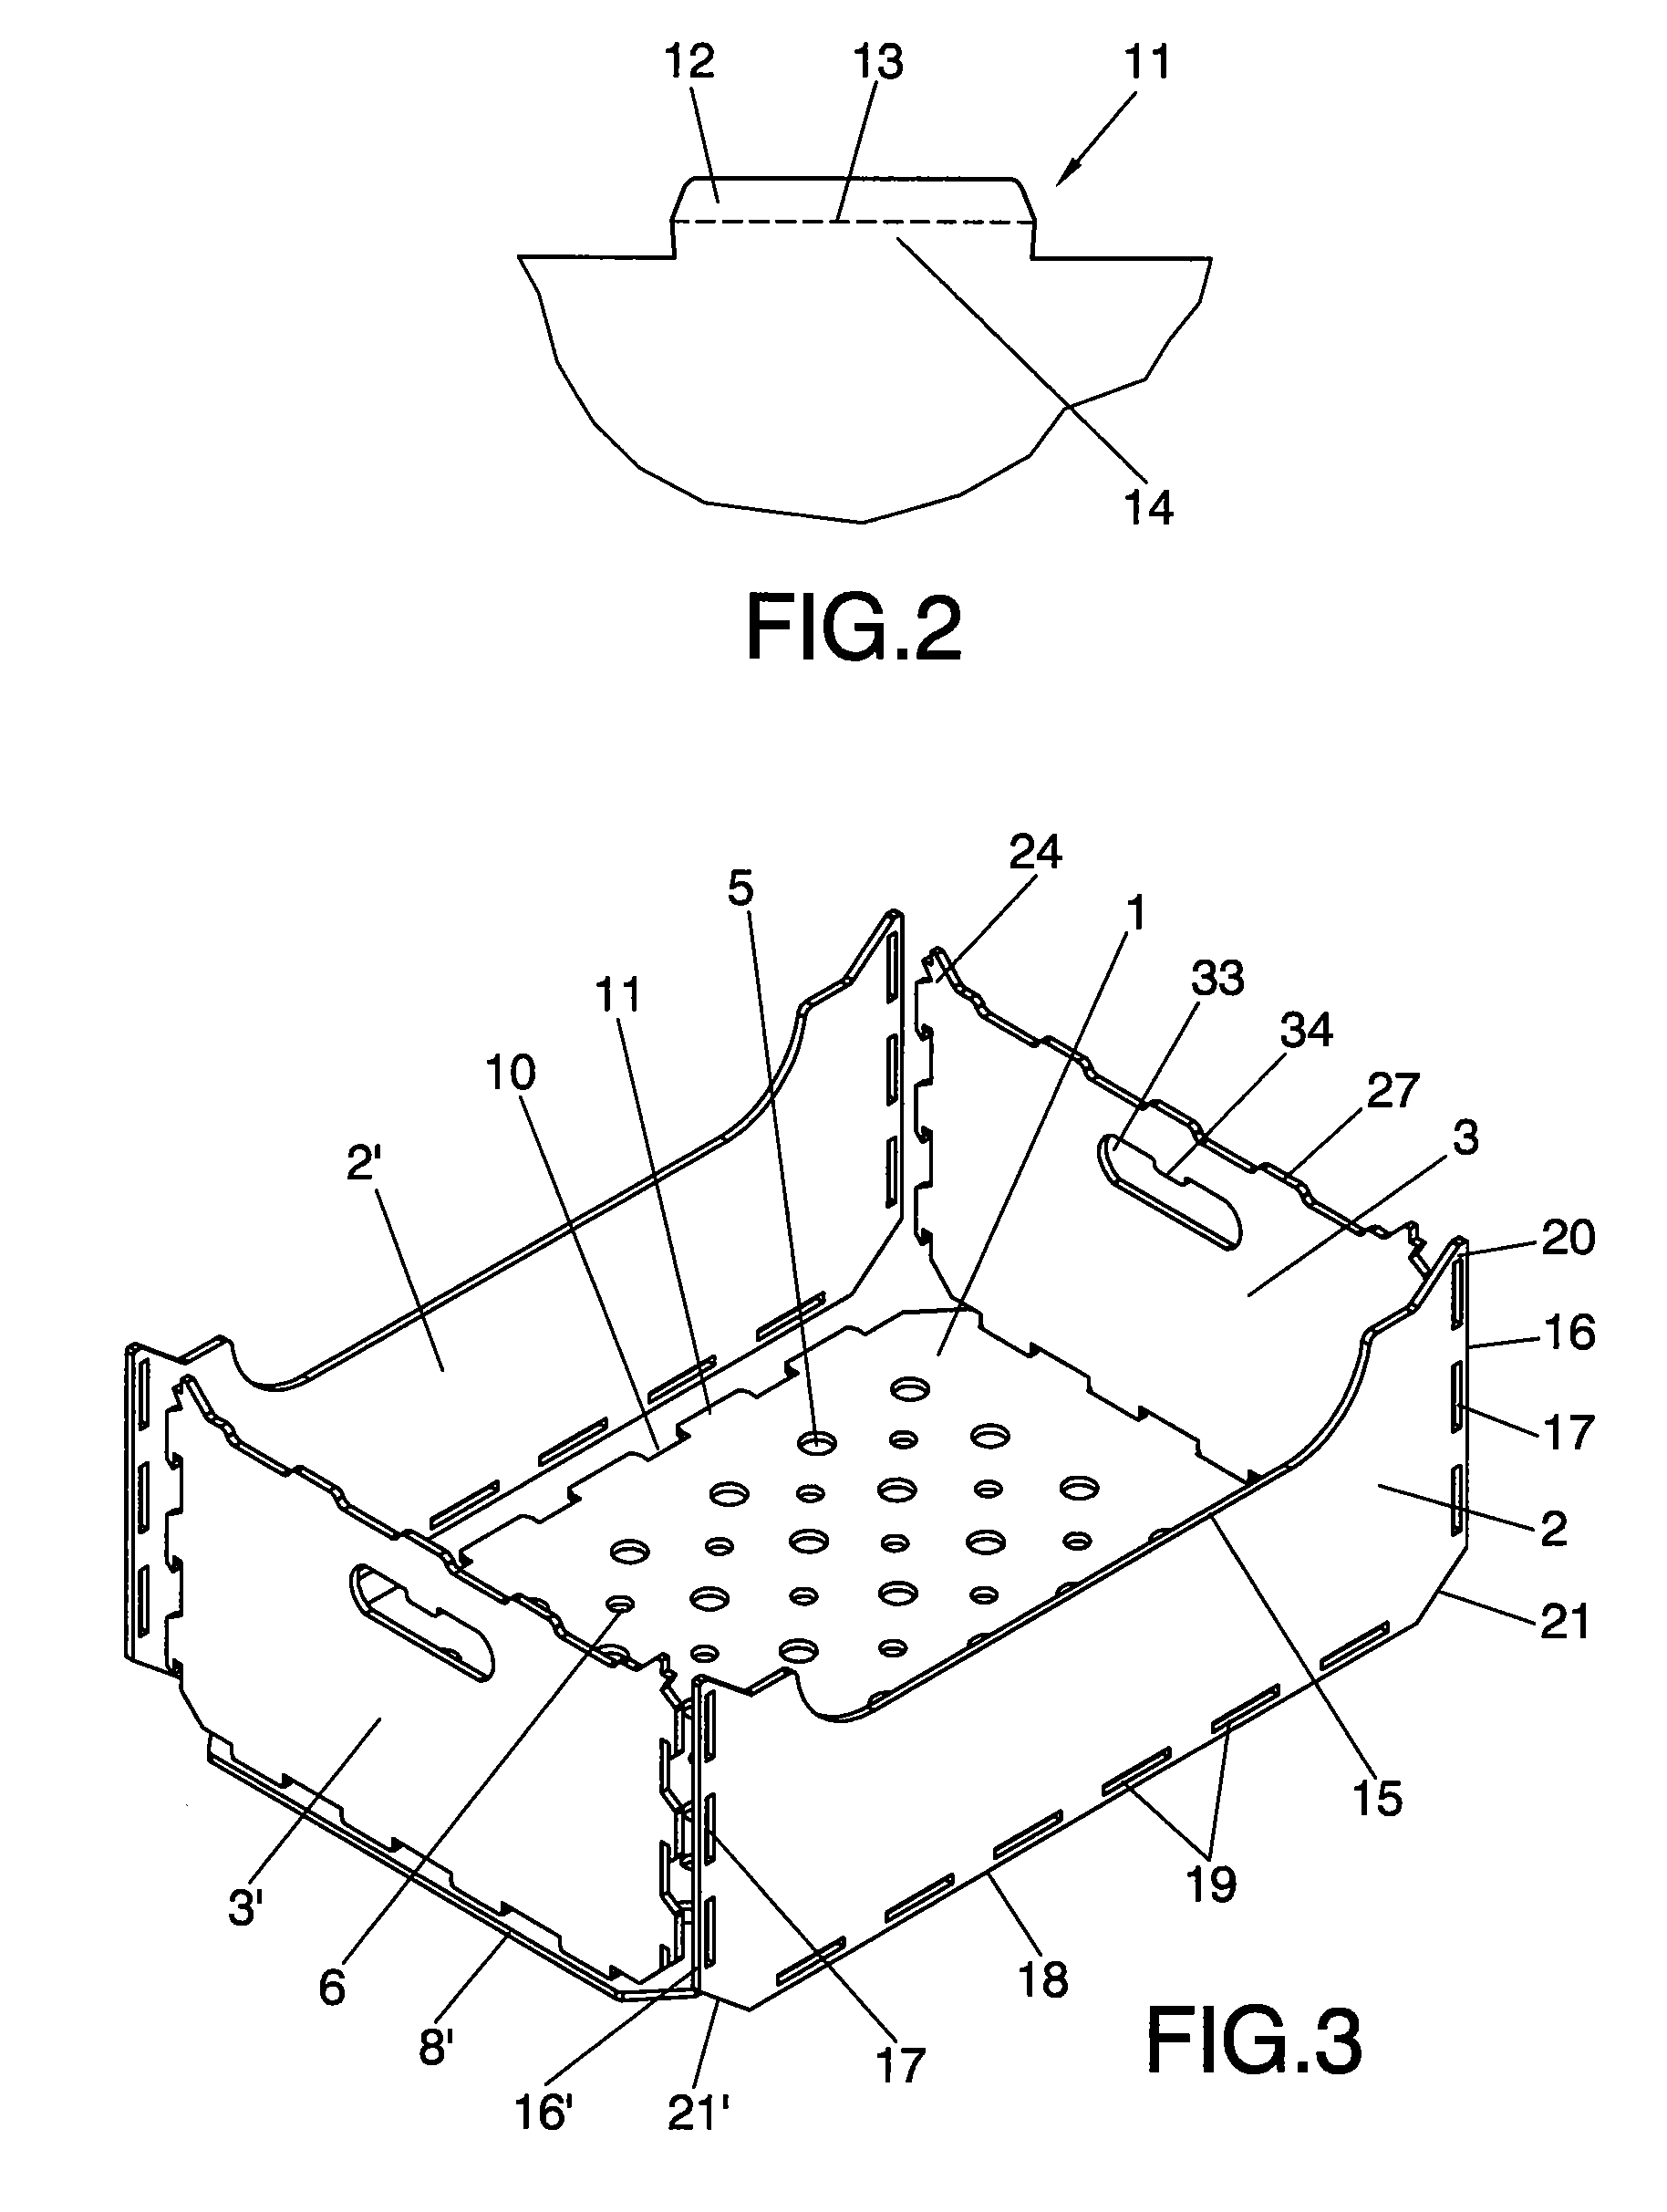 Single-material package for containing fruit and vegetable produce with lid